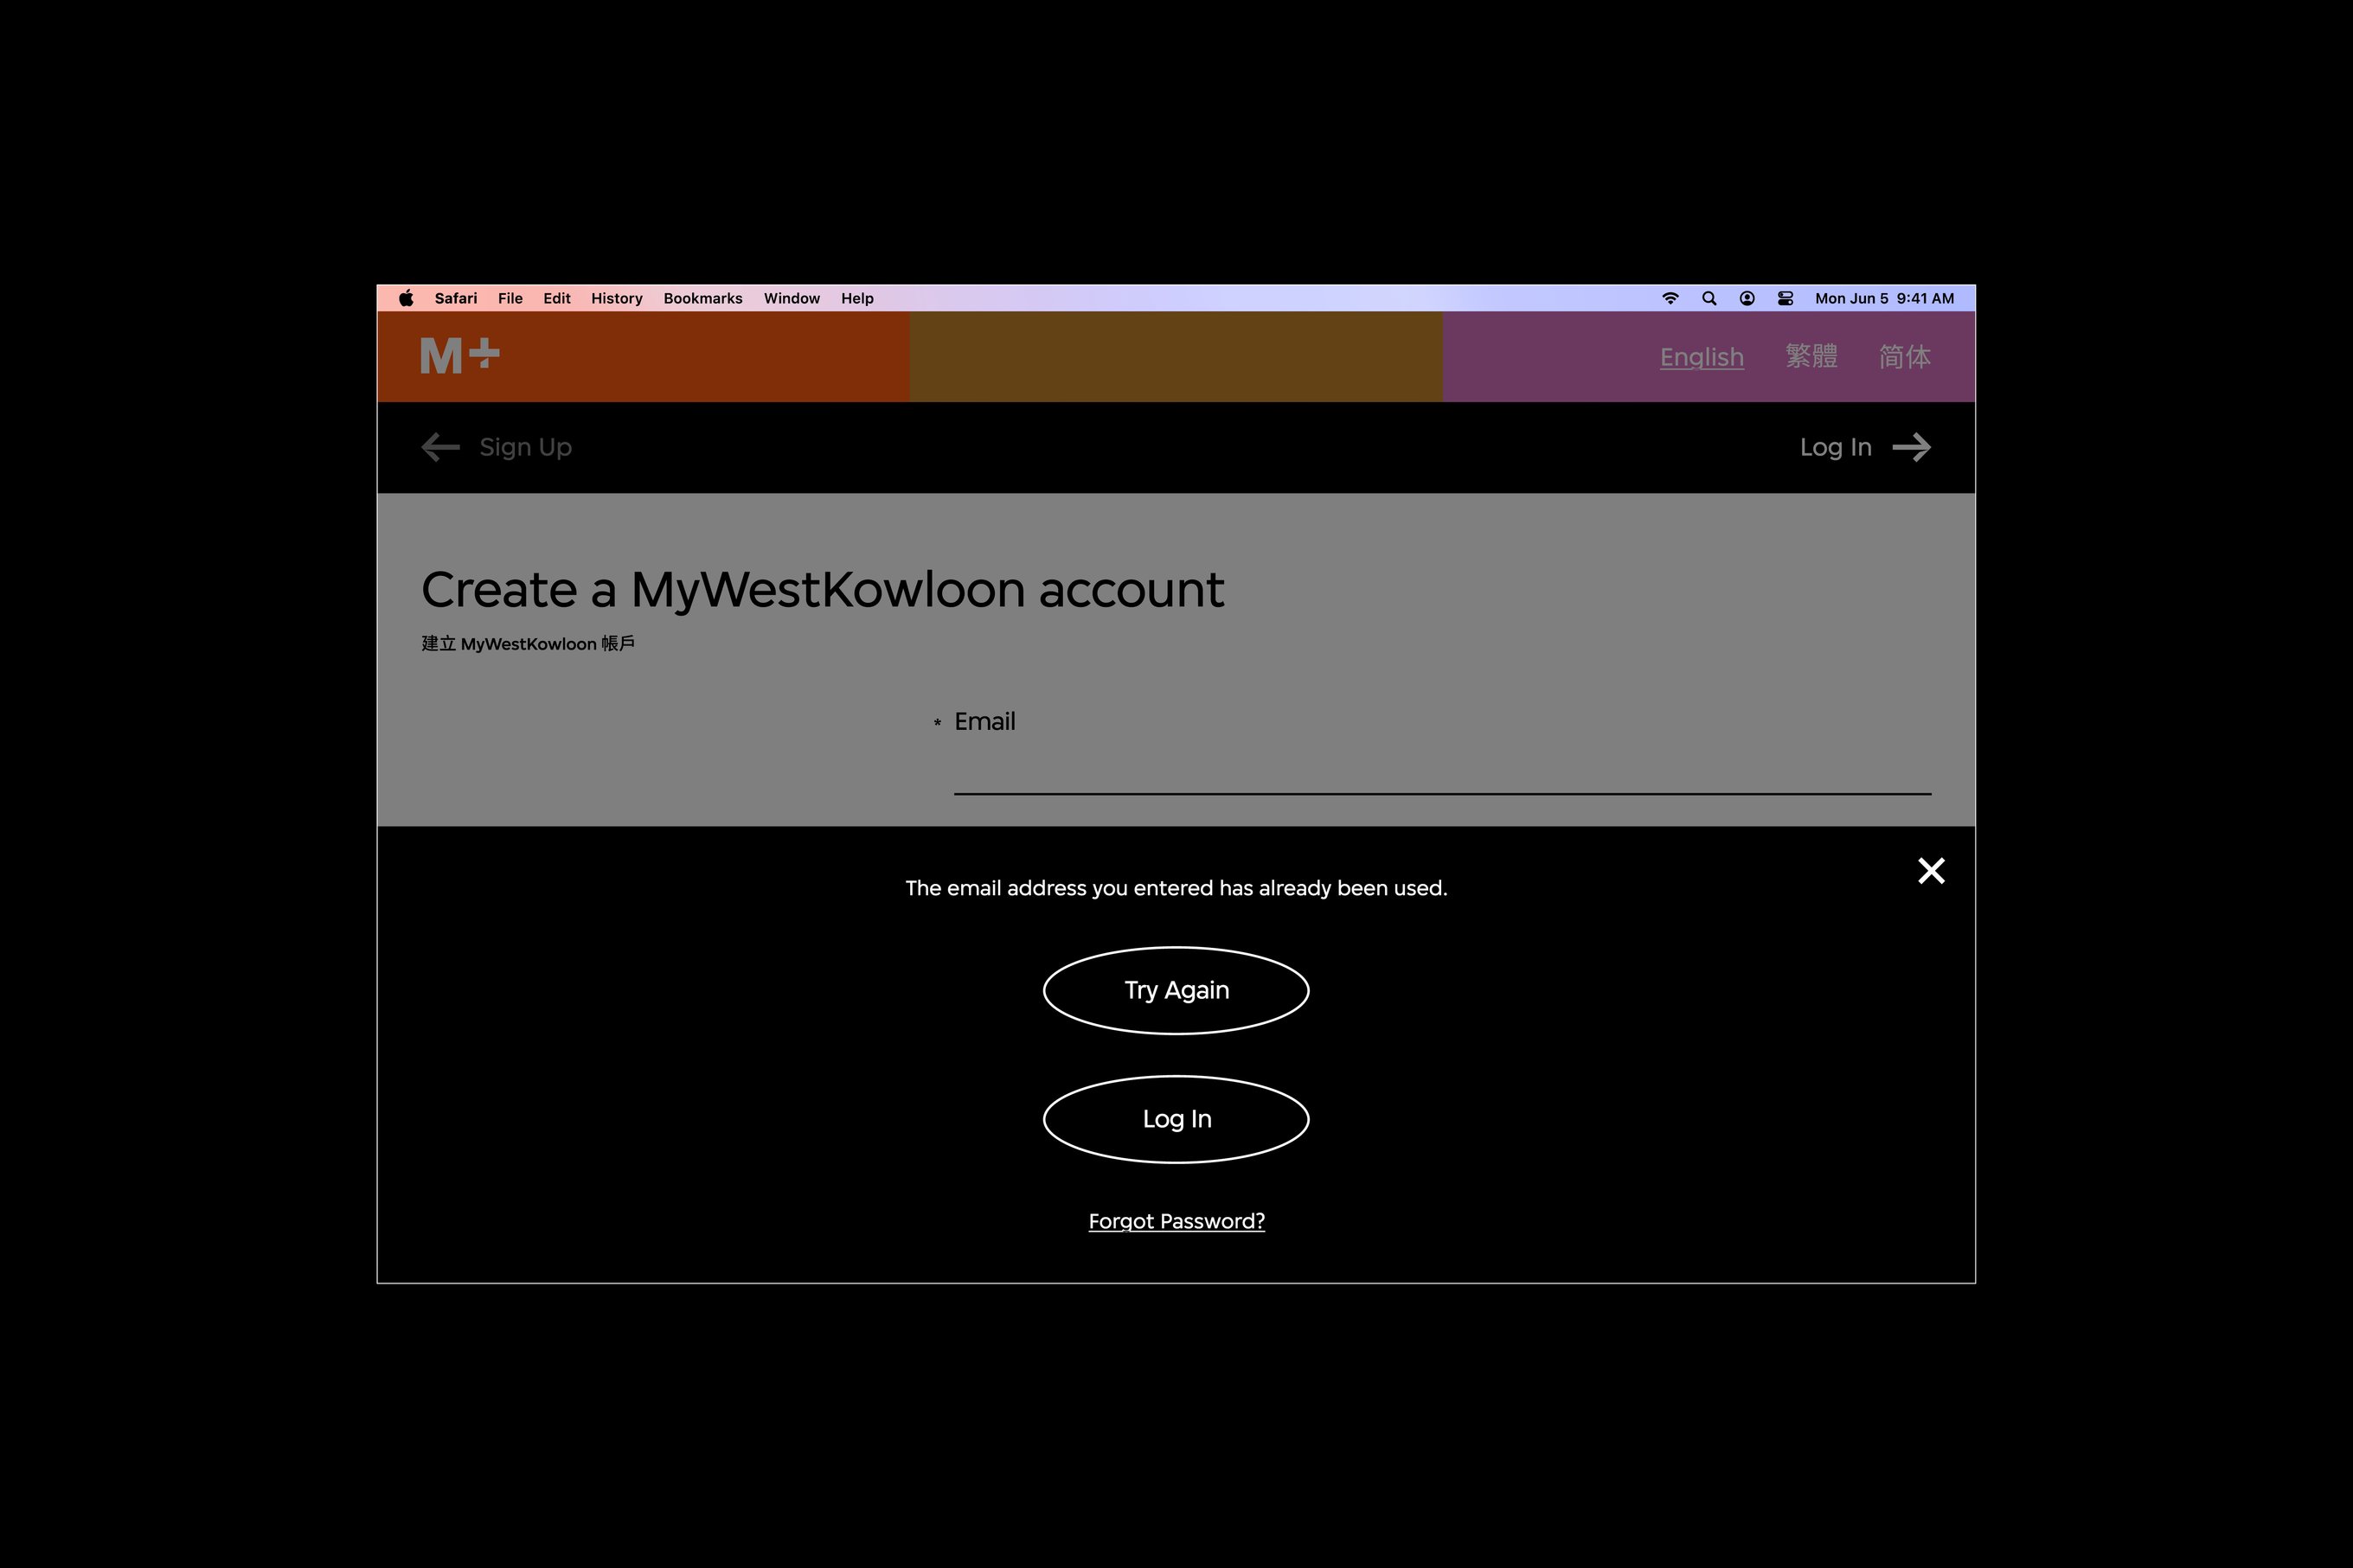 An interface of the M+ Wi-Fi sign up page with an email registration error slide-in window.